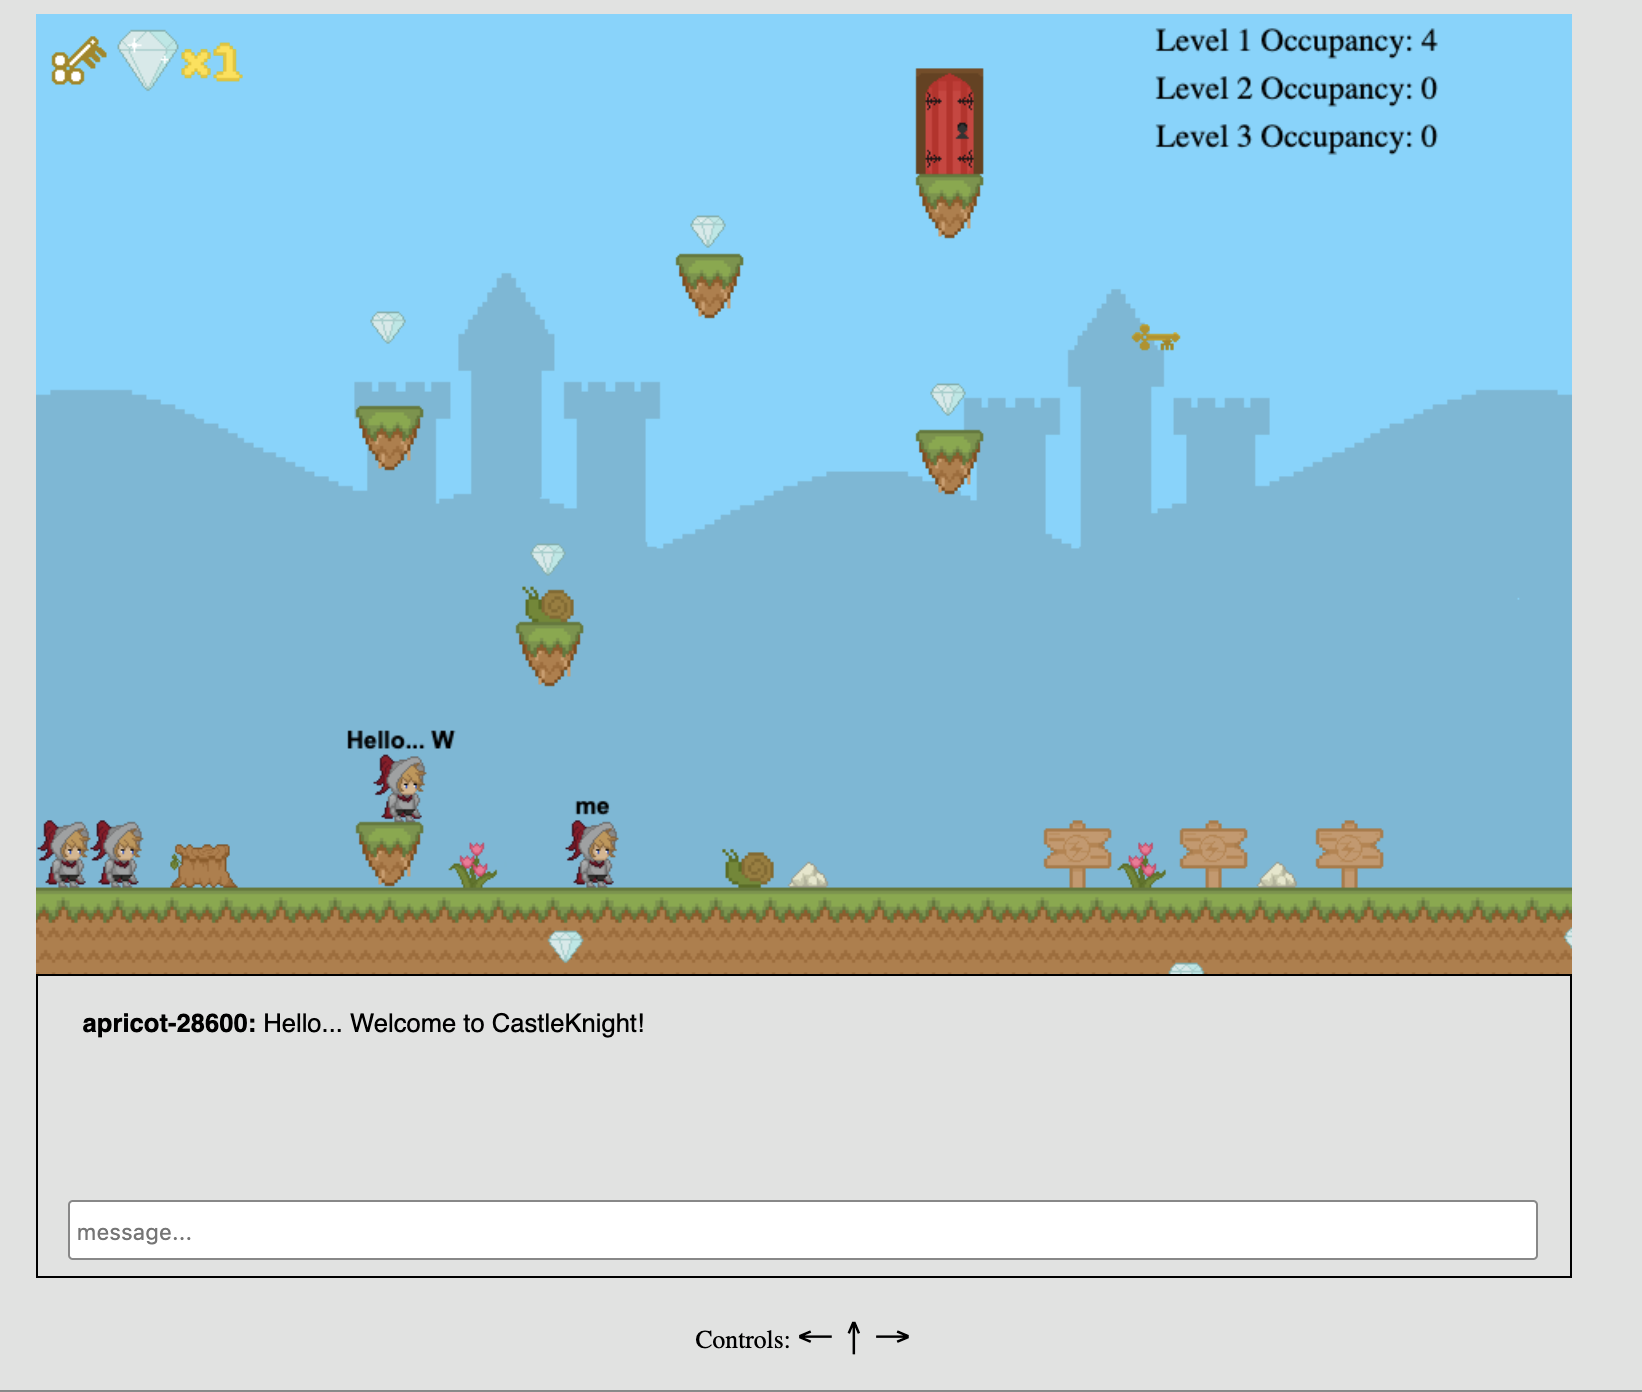 How to make a multiplayer online game with Phaser, Socket.io and